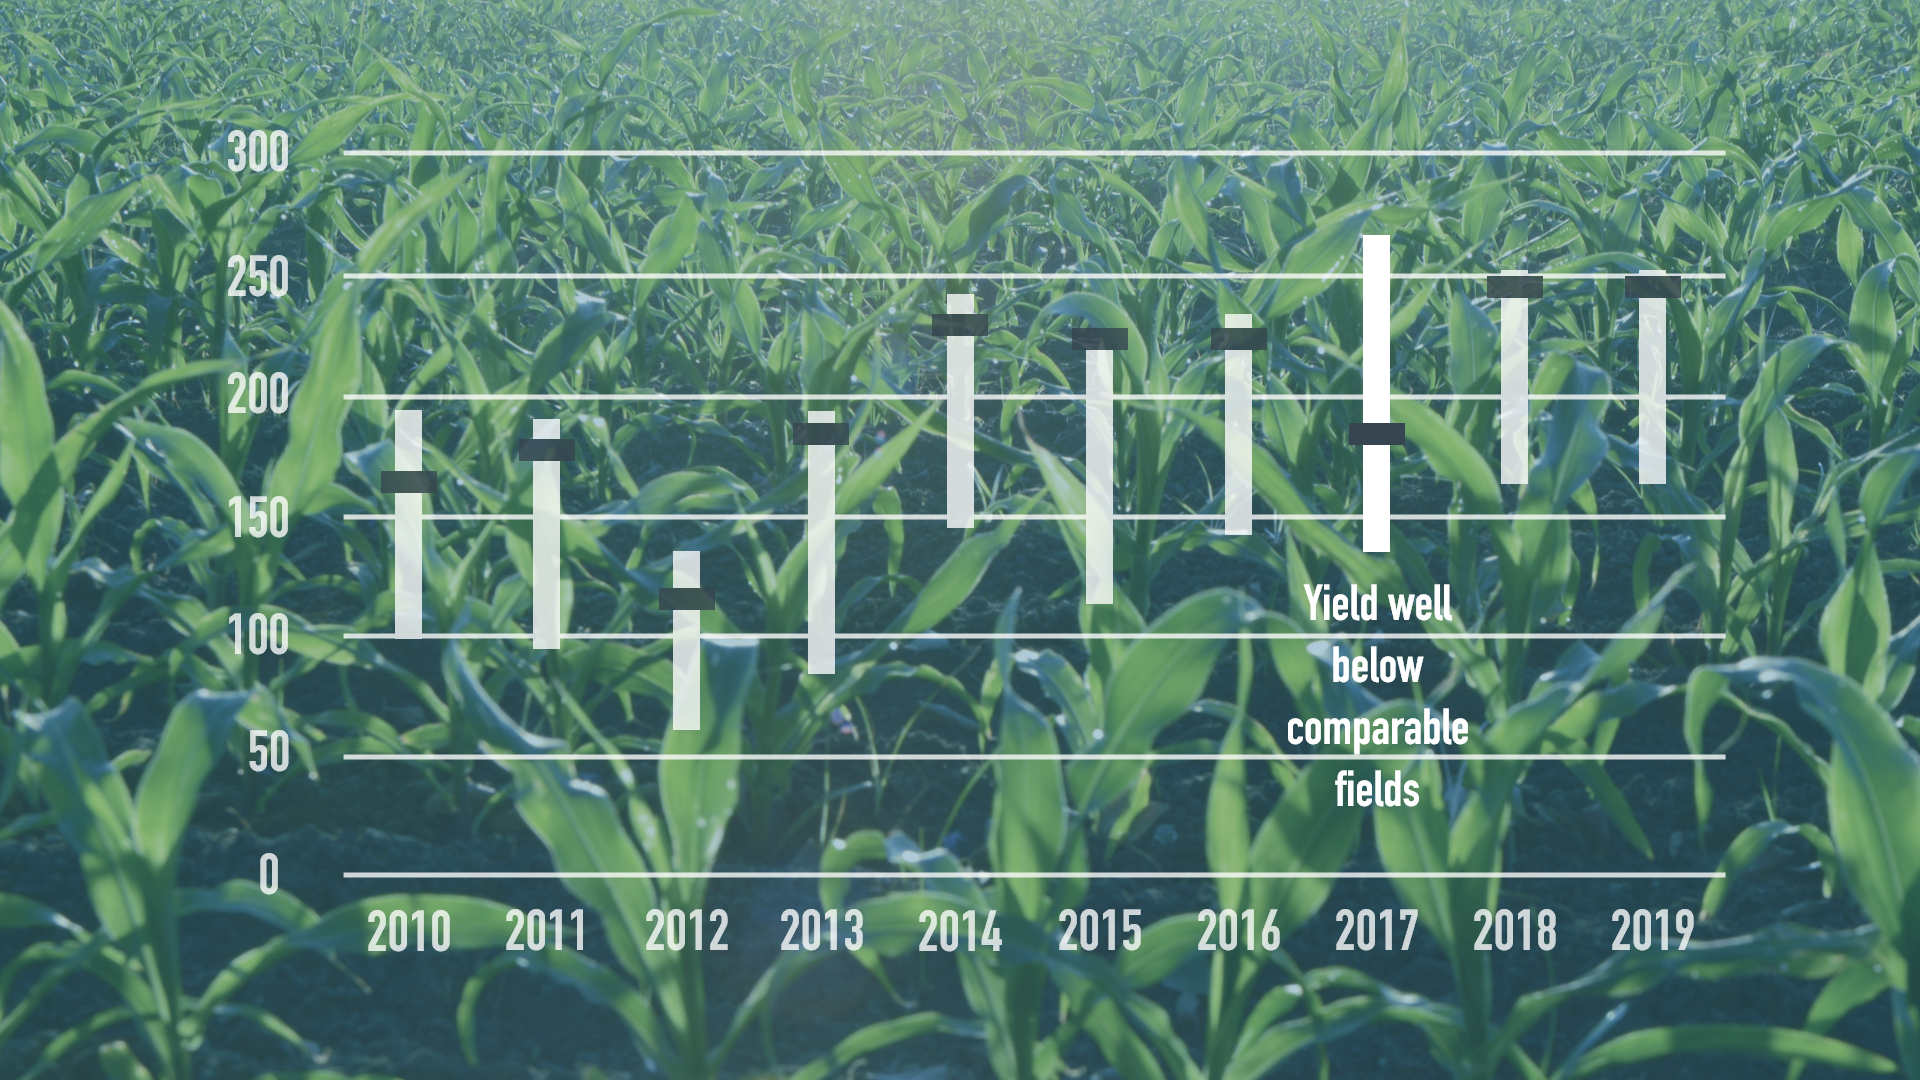 Yield performance comparisons to nearby fields, showing underperformance in 2017